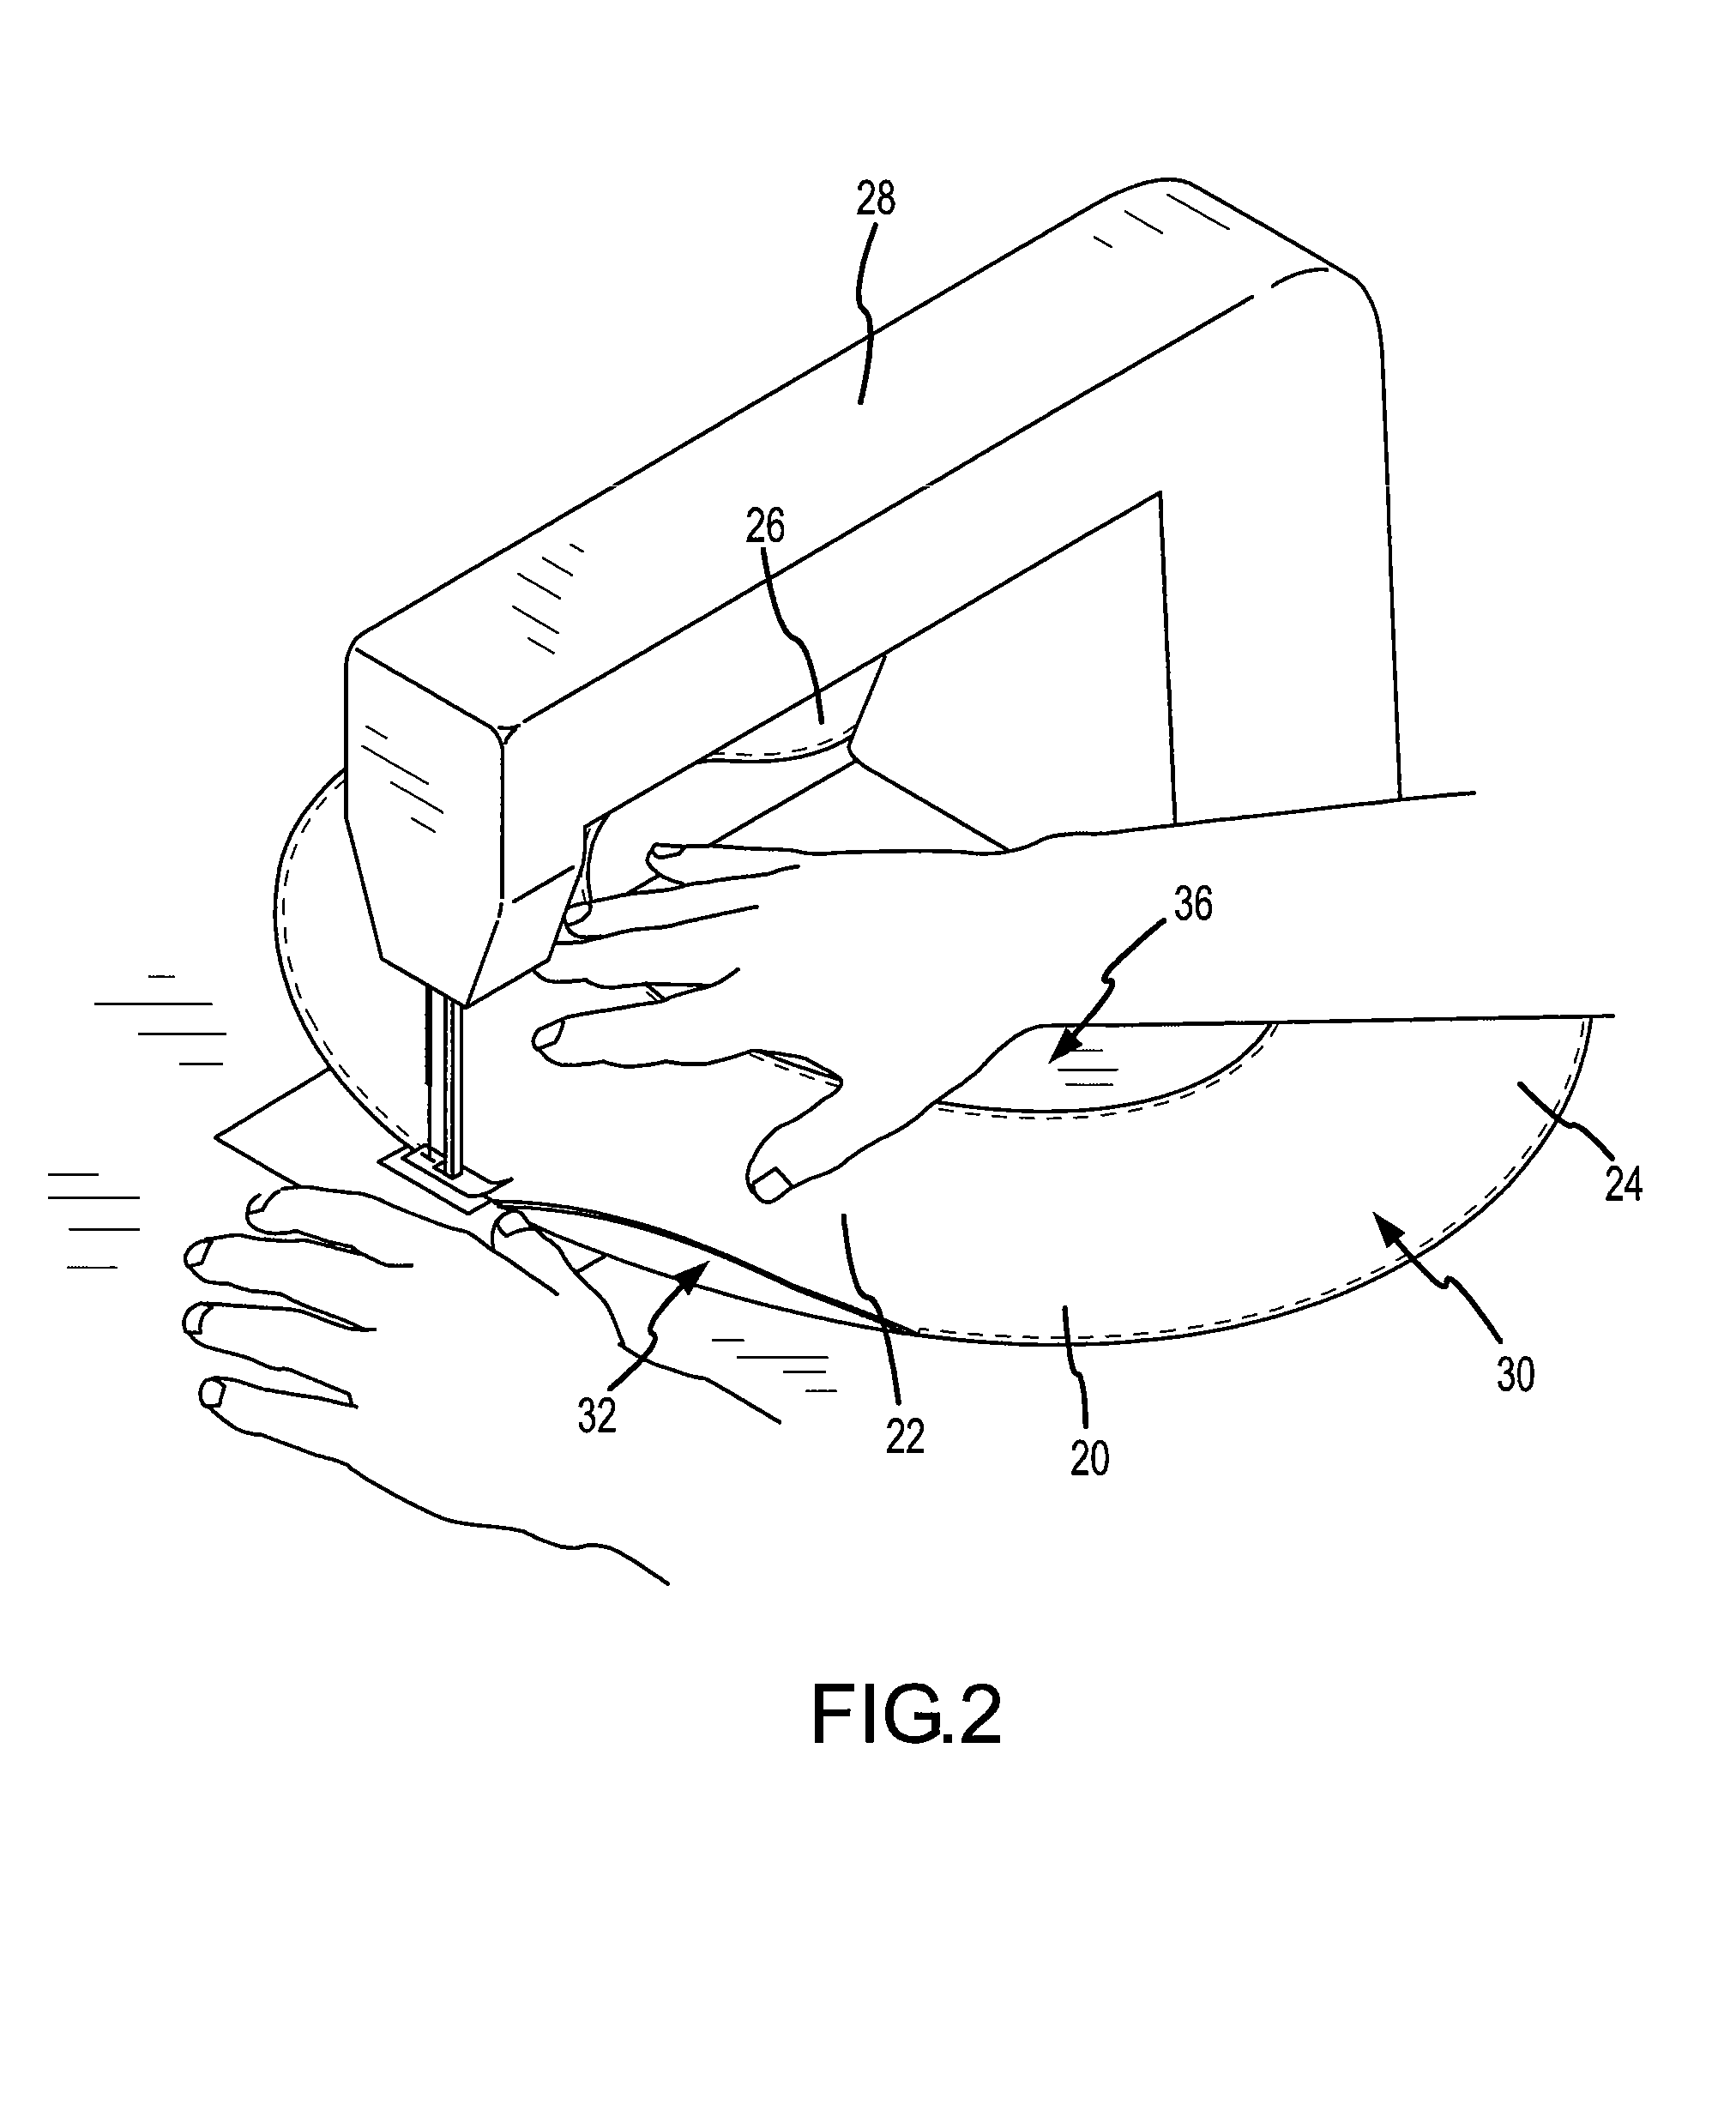 Method for manufacturing support pillows